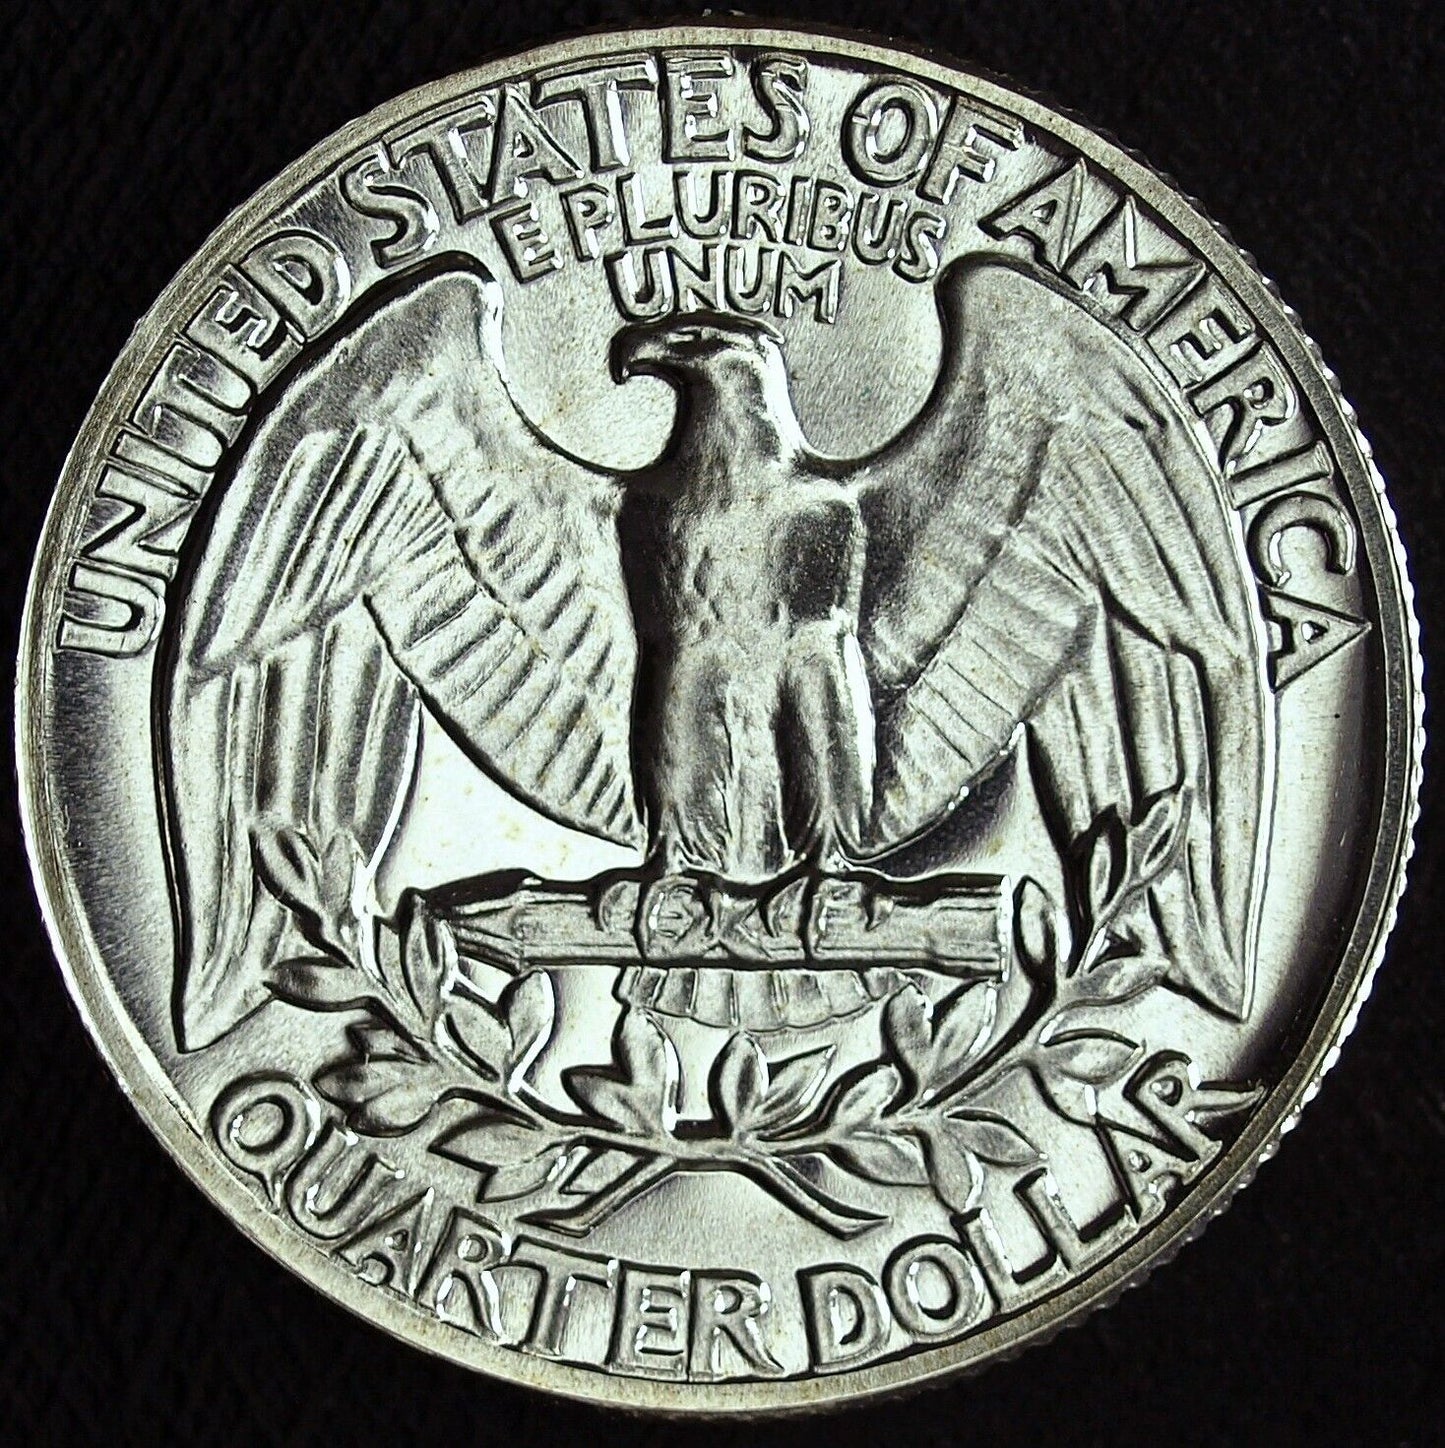 1964 Proof Washington Silver Quarter ☆ Great For Sets ☆ Fresh From Proof Set 204